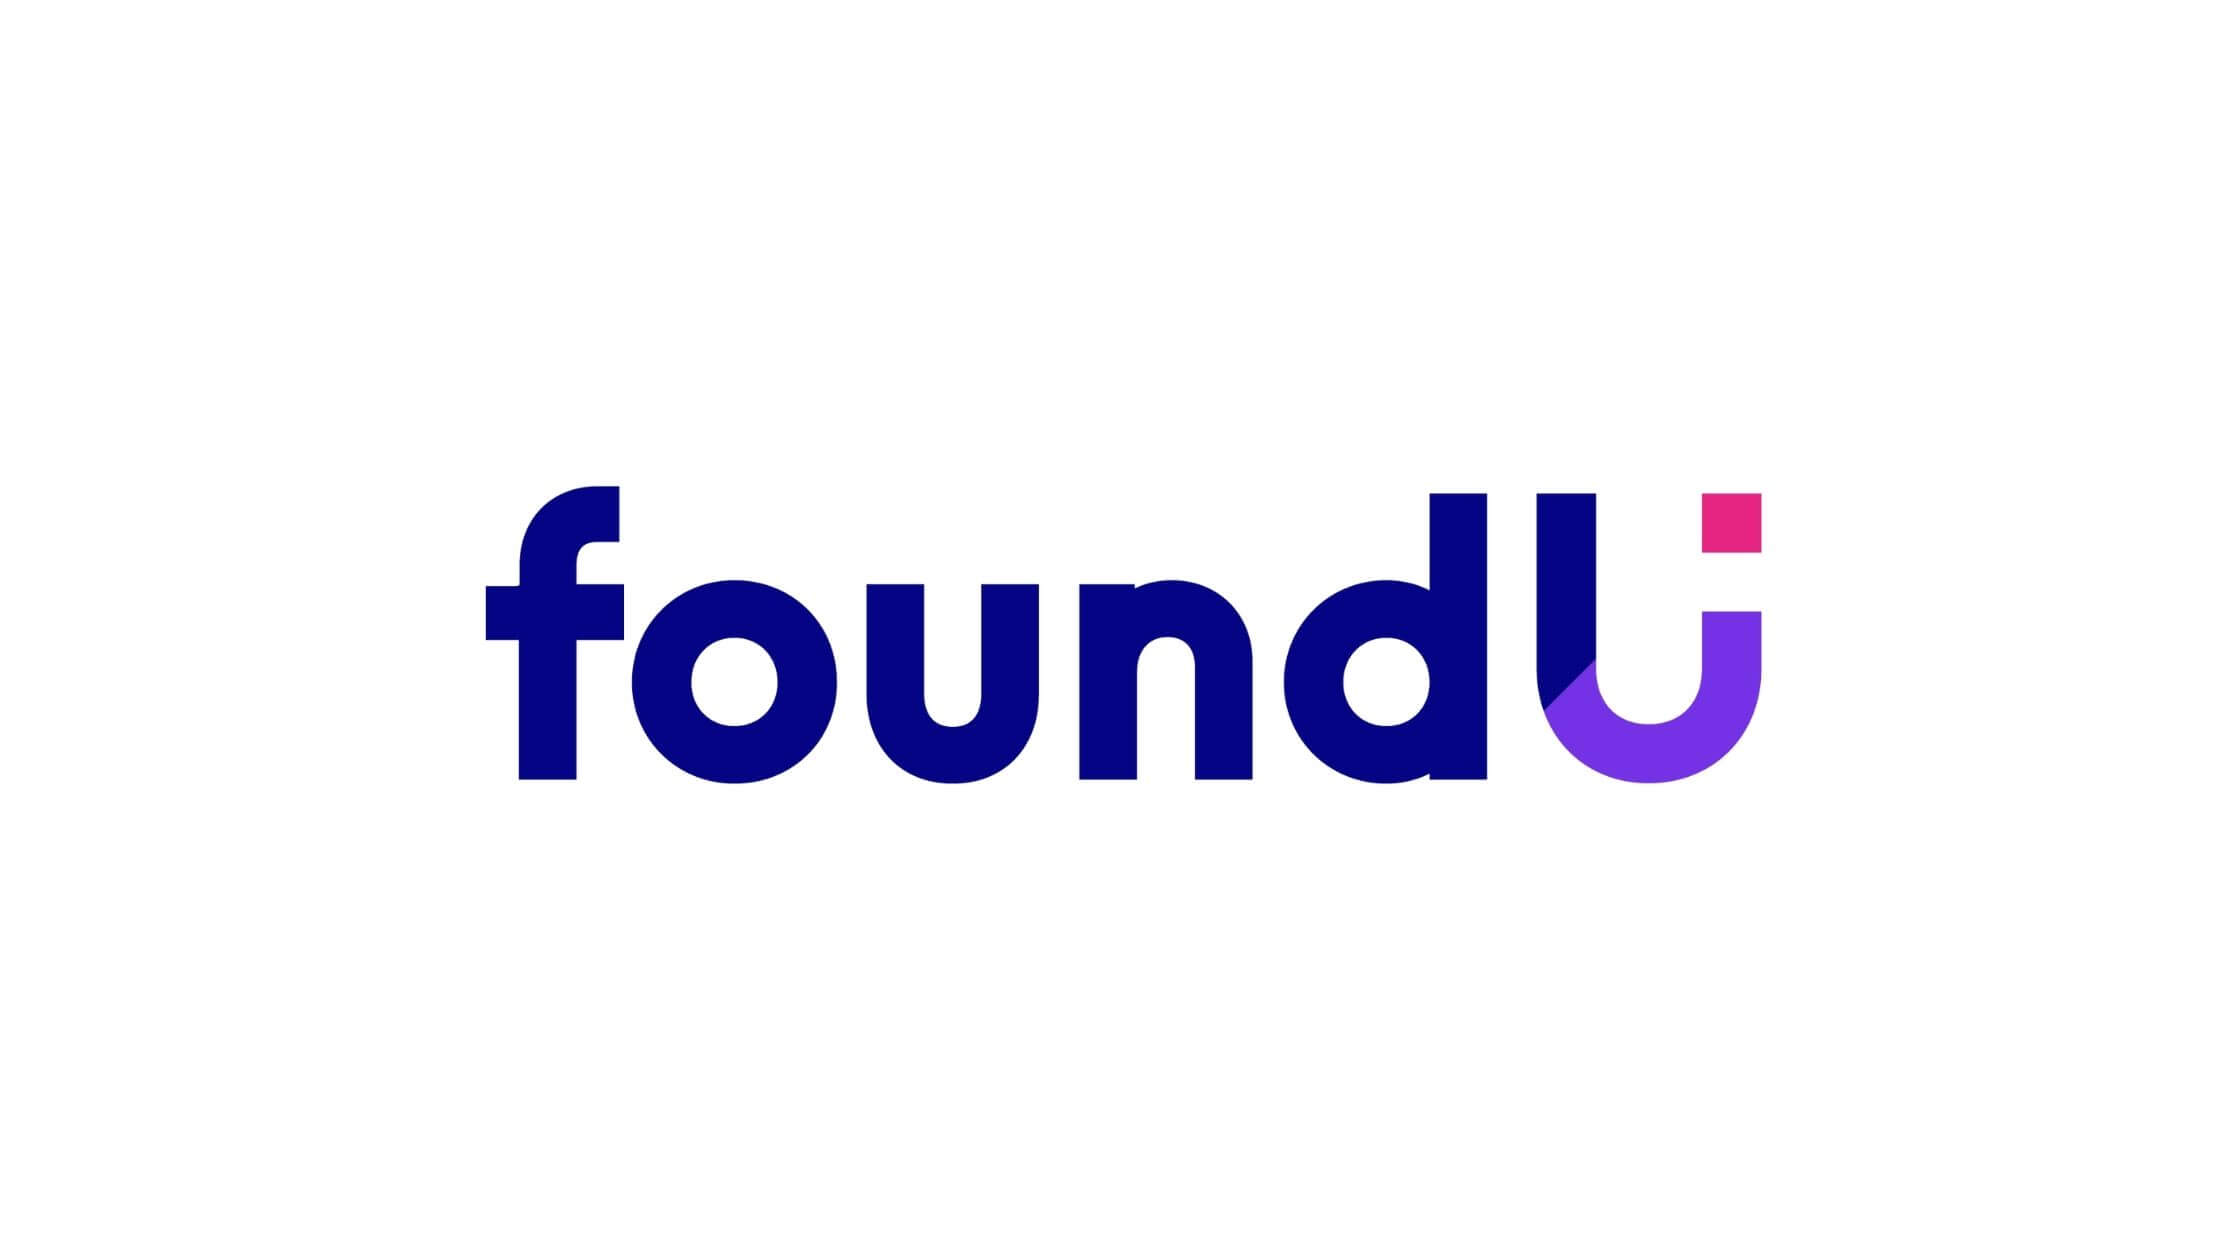 The new look of foundU